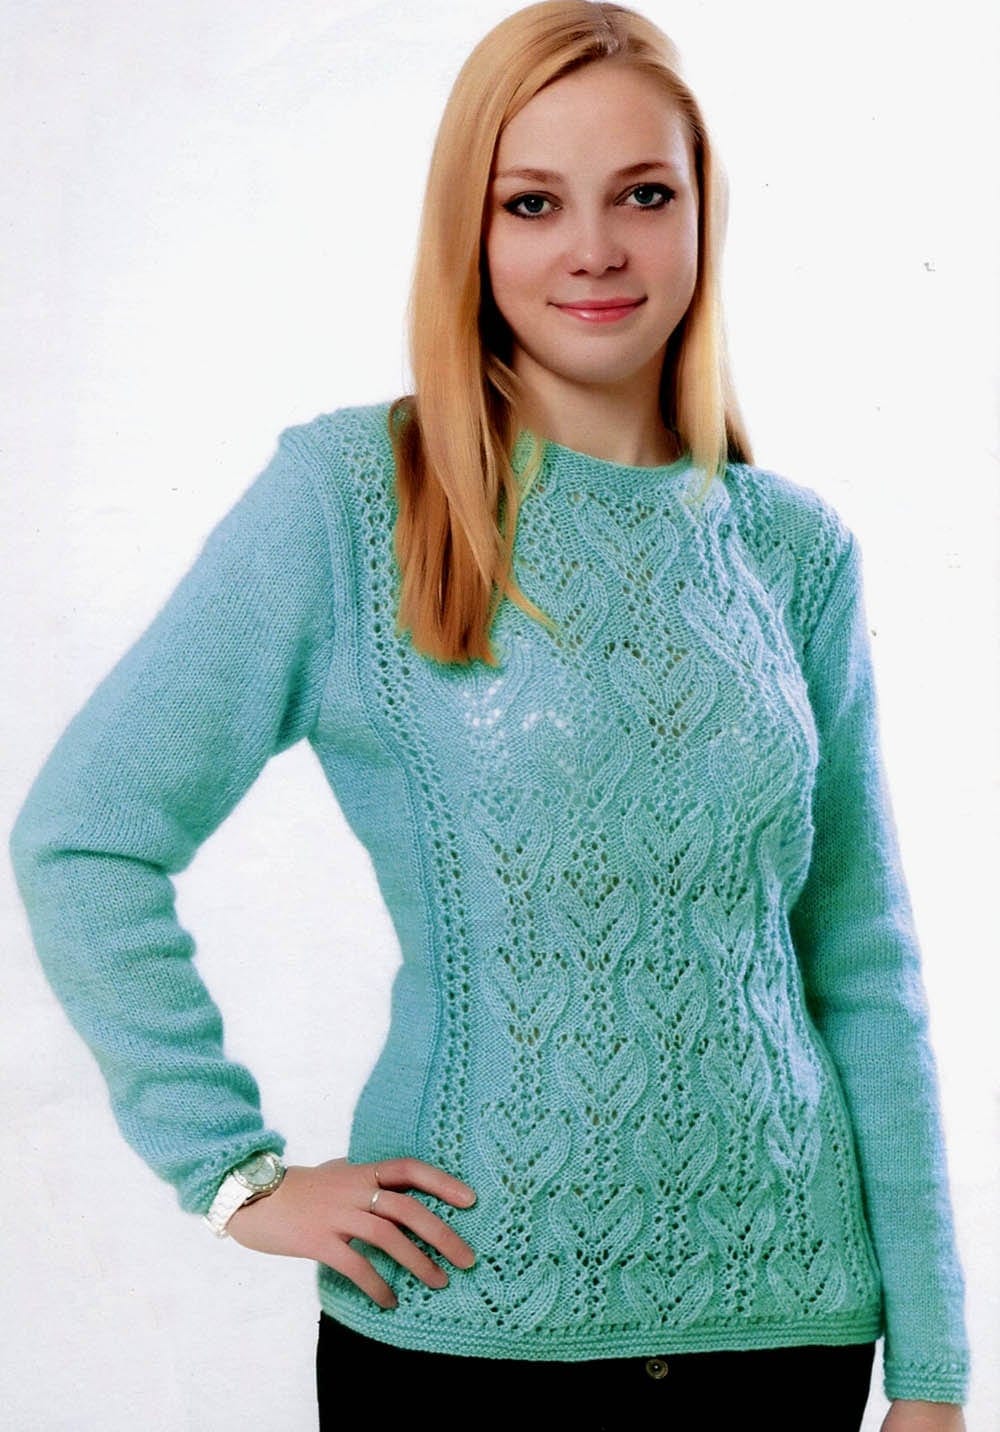 Free Knitting Patterns - Sweater With Leaf Pattern